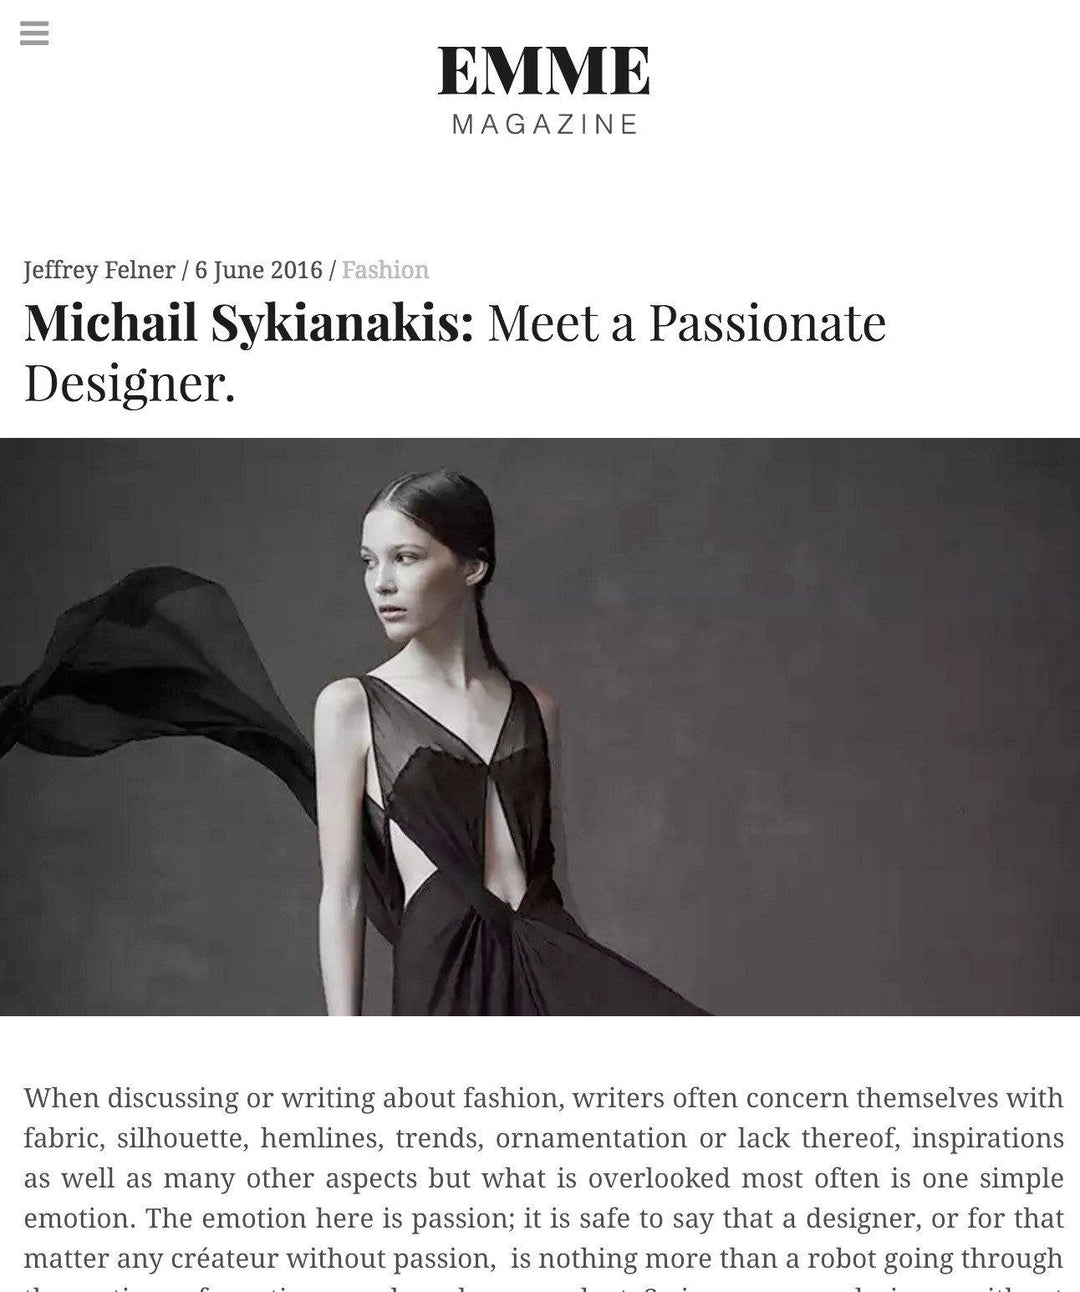 As Featured in Emme Magazine: Meet a Passionate Designer